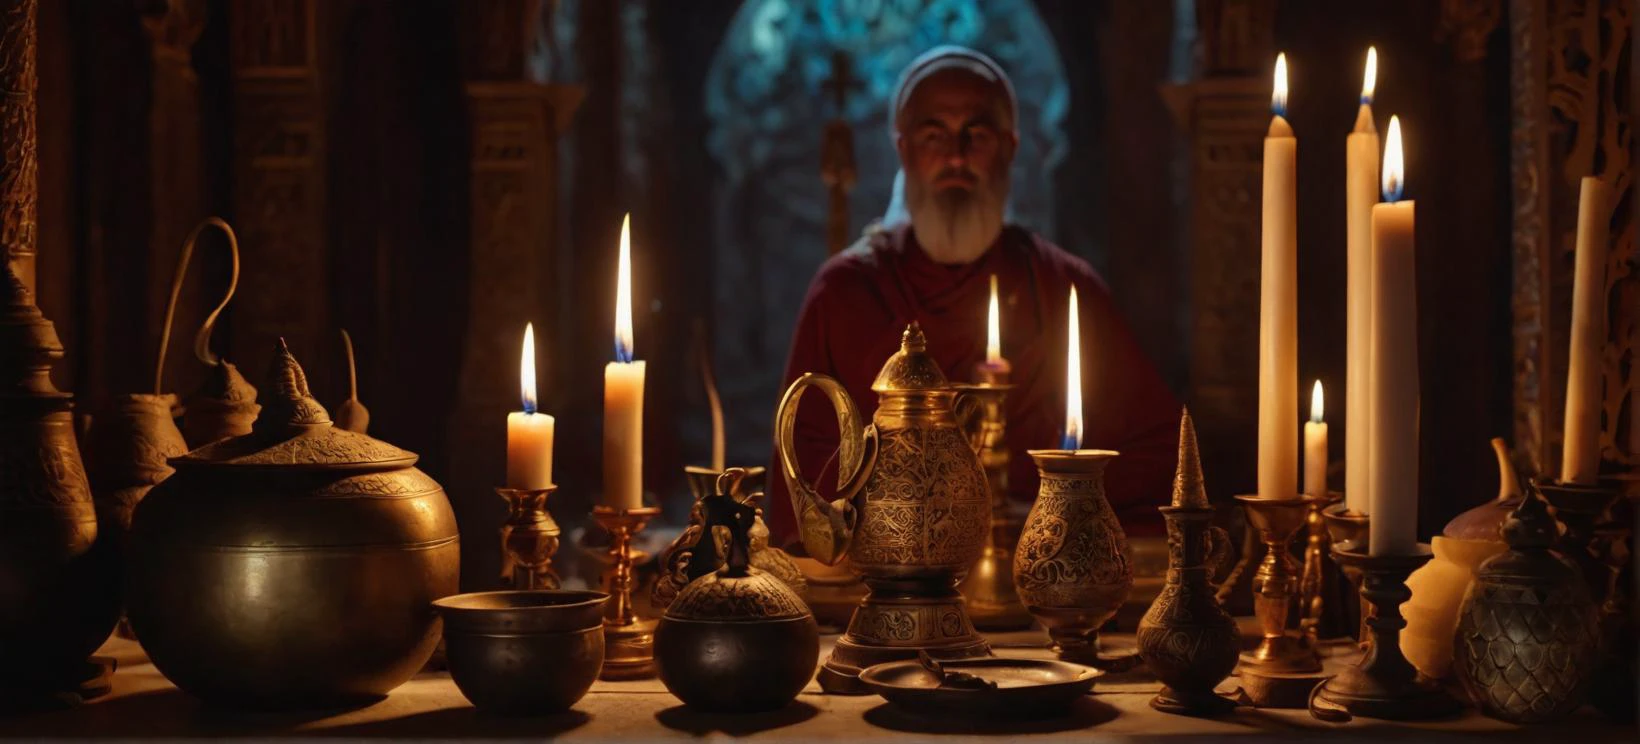 A cinematic film still capturing the ornate, ritualistic implements used by a religious cult member, the flickering candlelight casting an otherworldly glow on the arcane objects.

